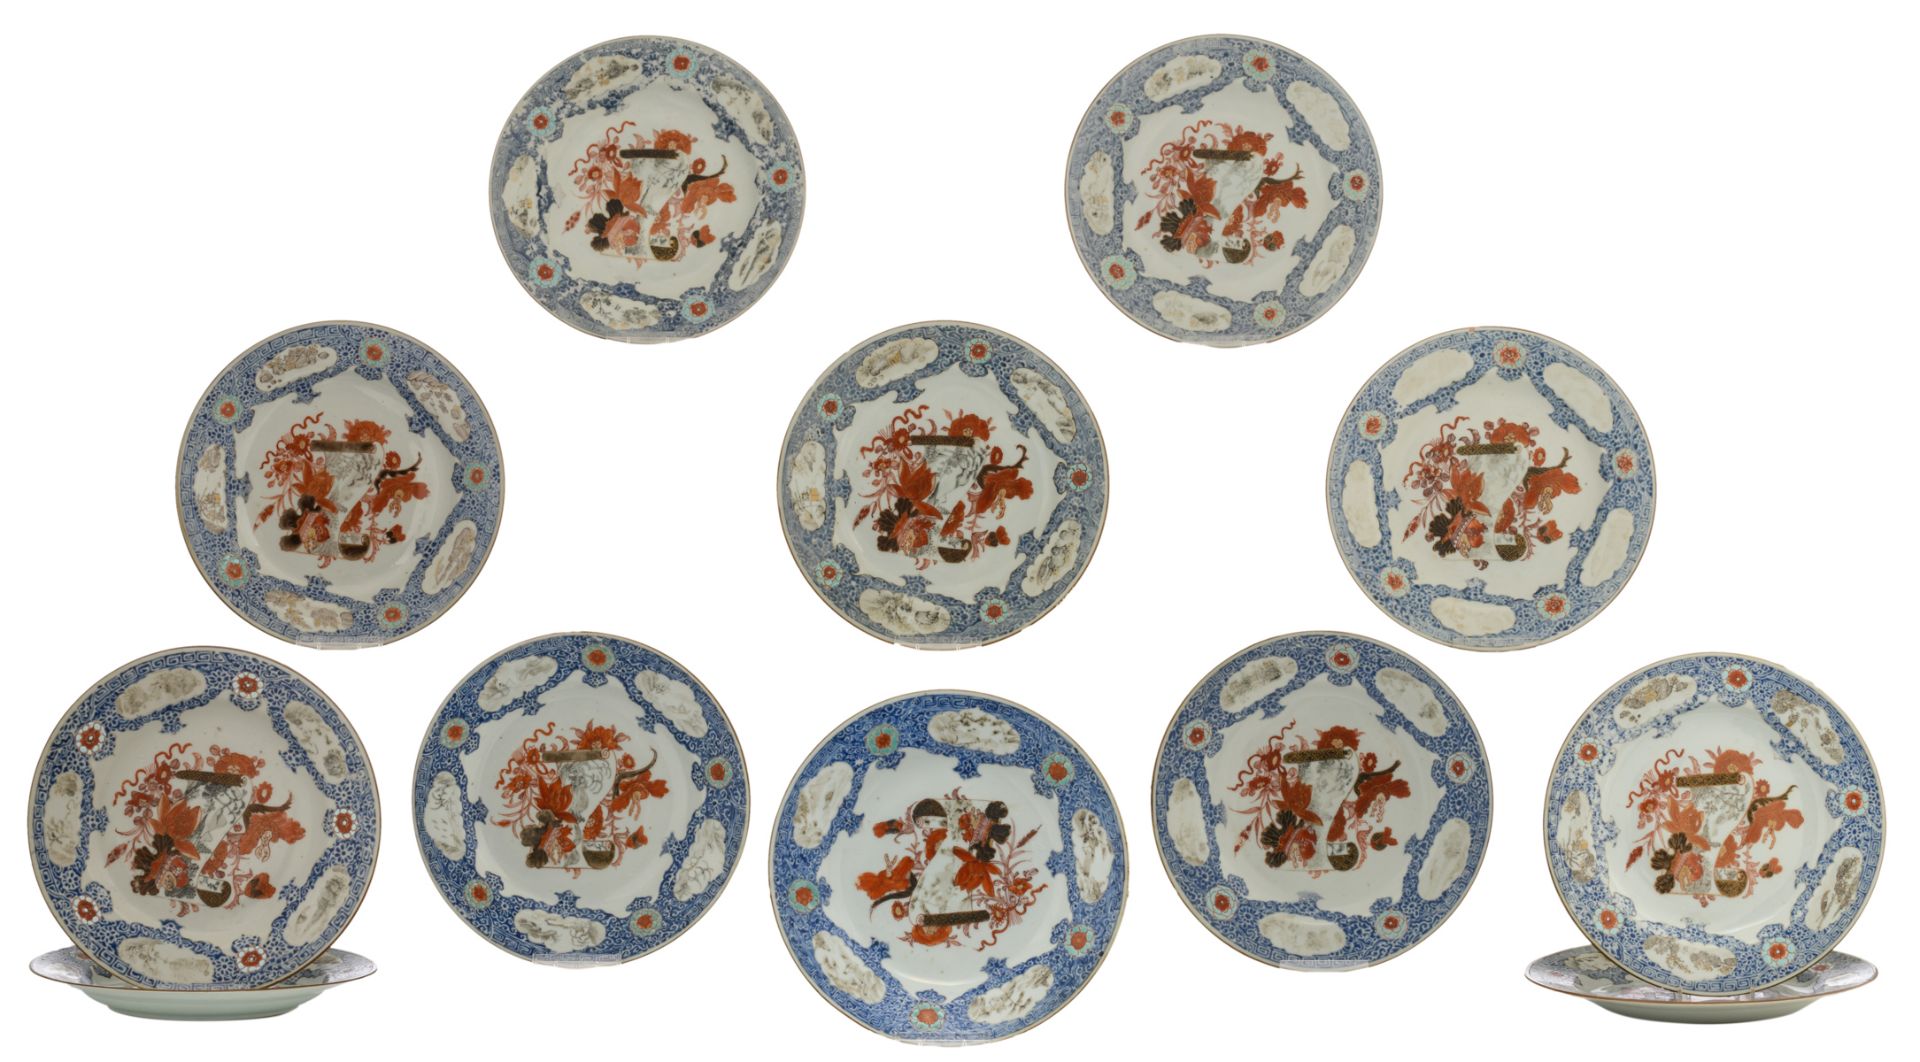 Twelve Chinese export porcelain dishes with a Japanese inspired decoration in iron red, gilt and